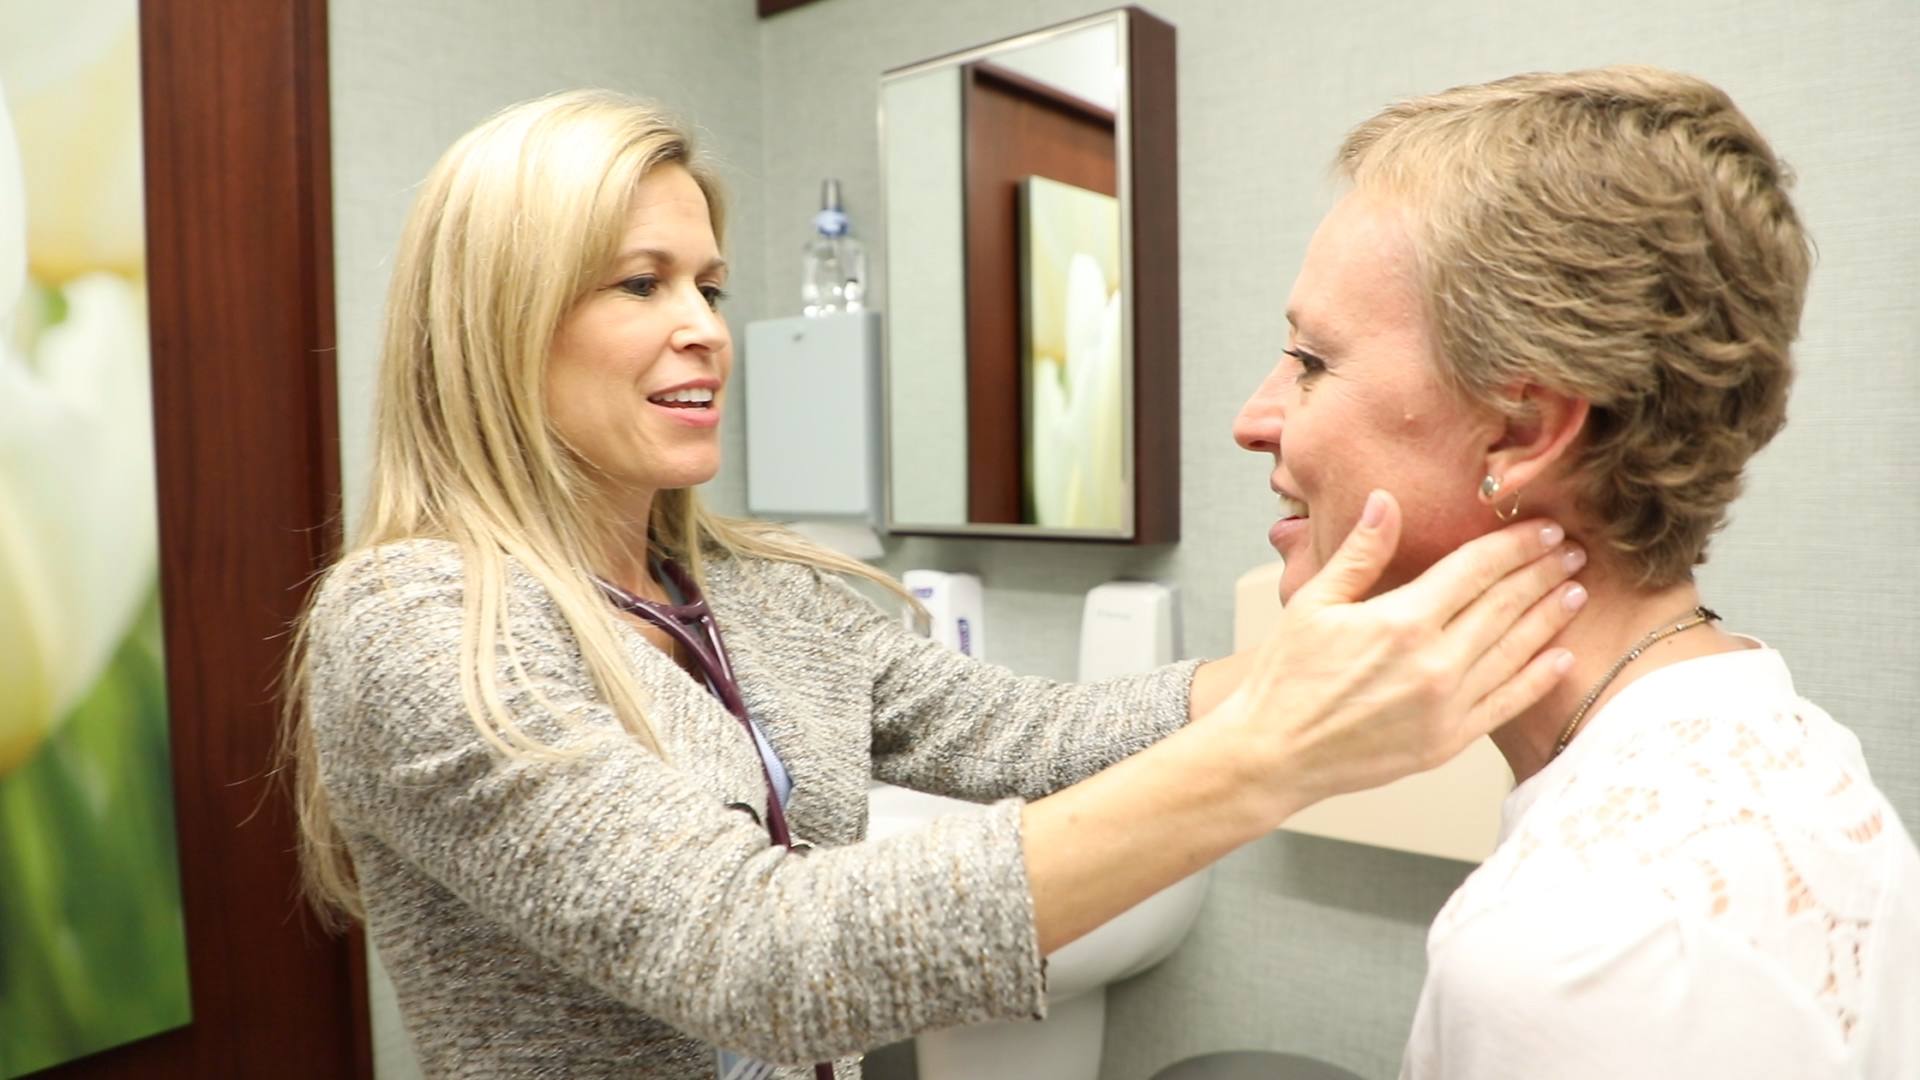 Dr. Dawn Mussallem in her office consulting with and examining breast cancer patient Jennifer Deaderick